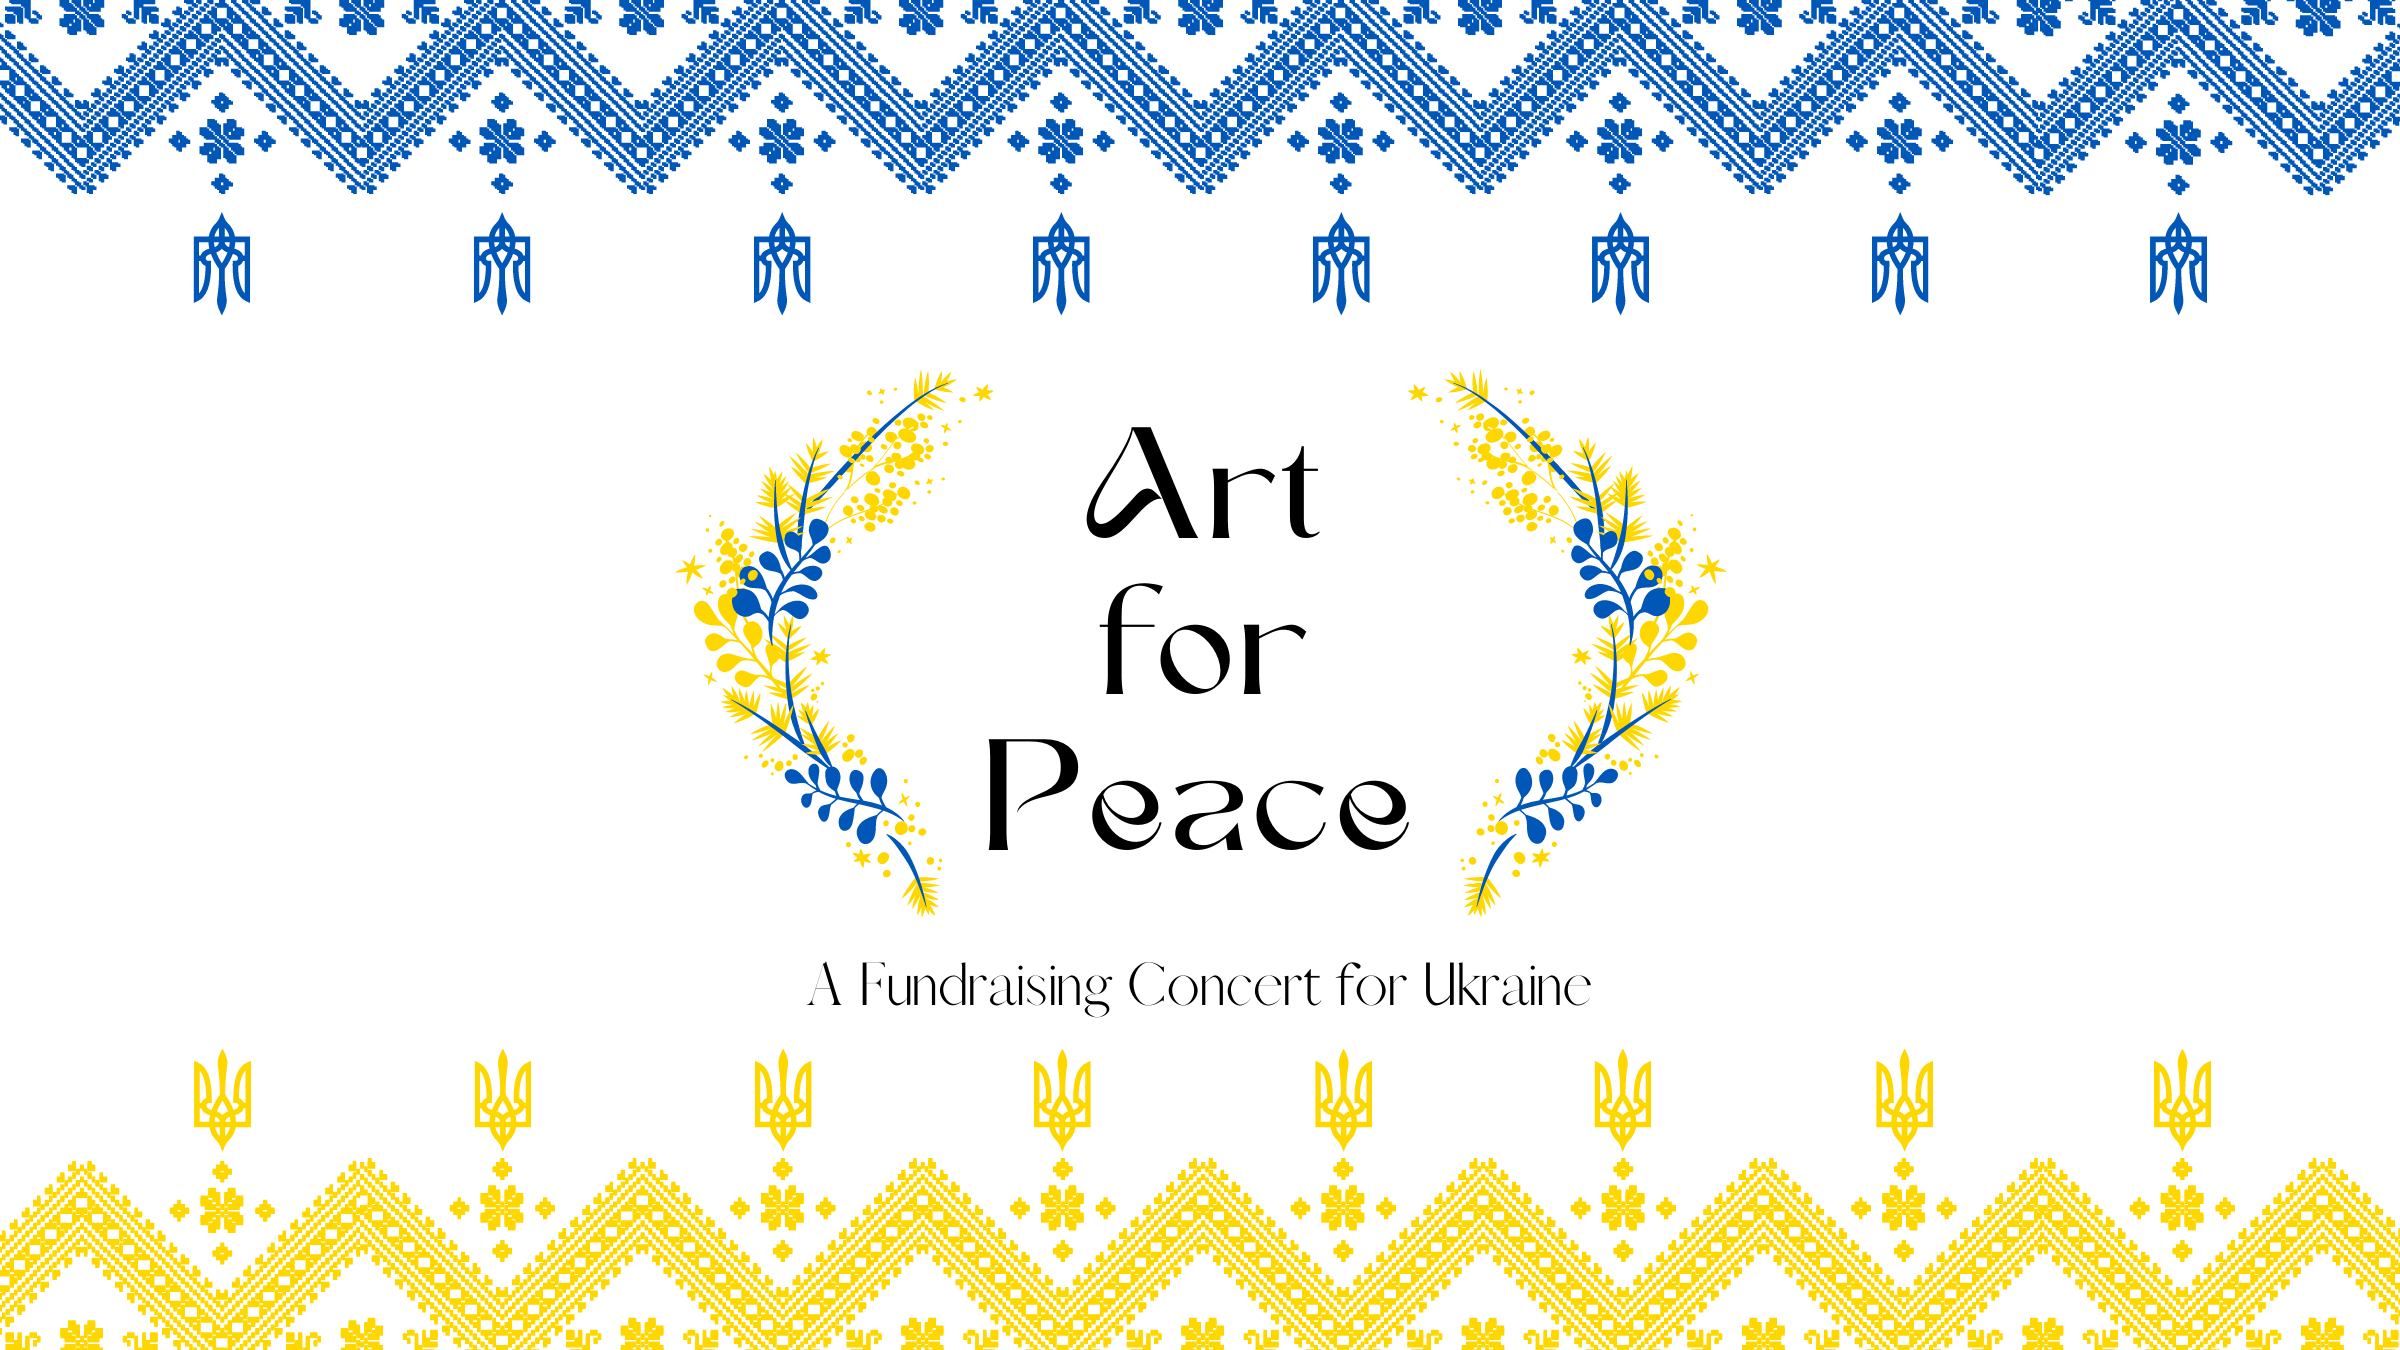 Art for Peace